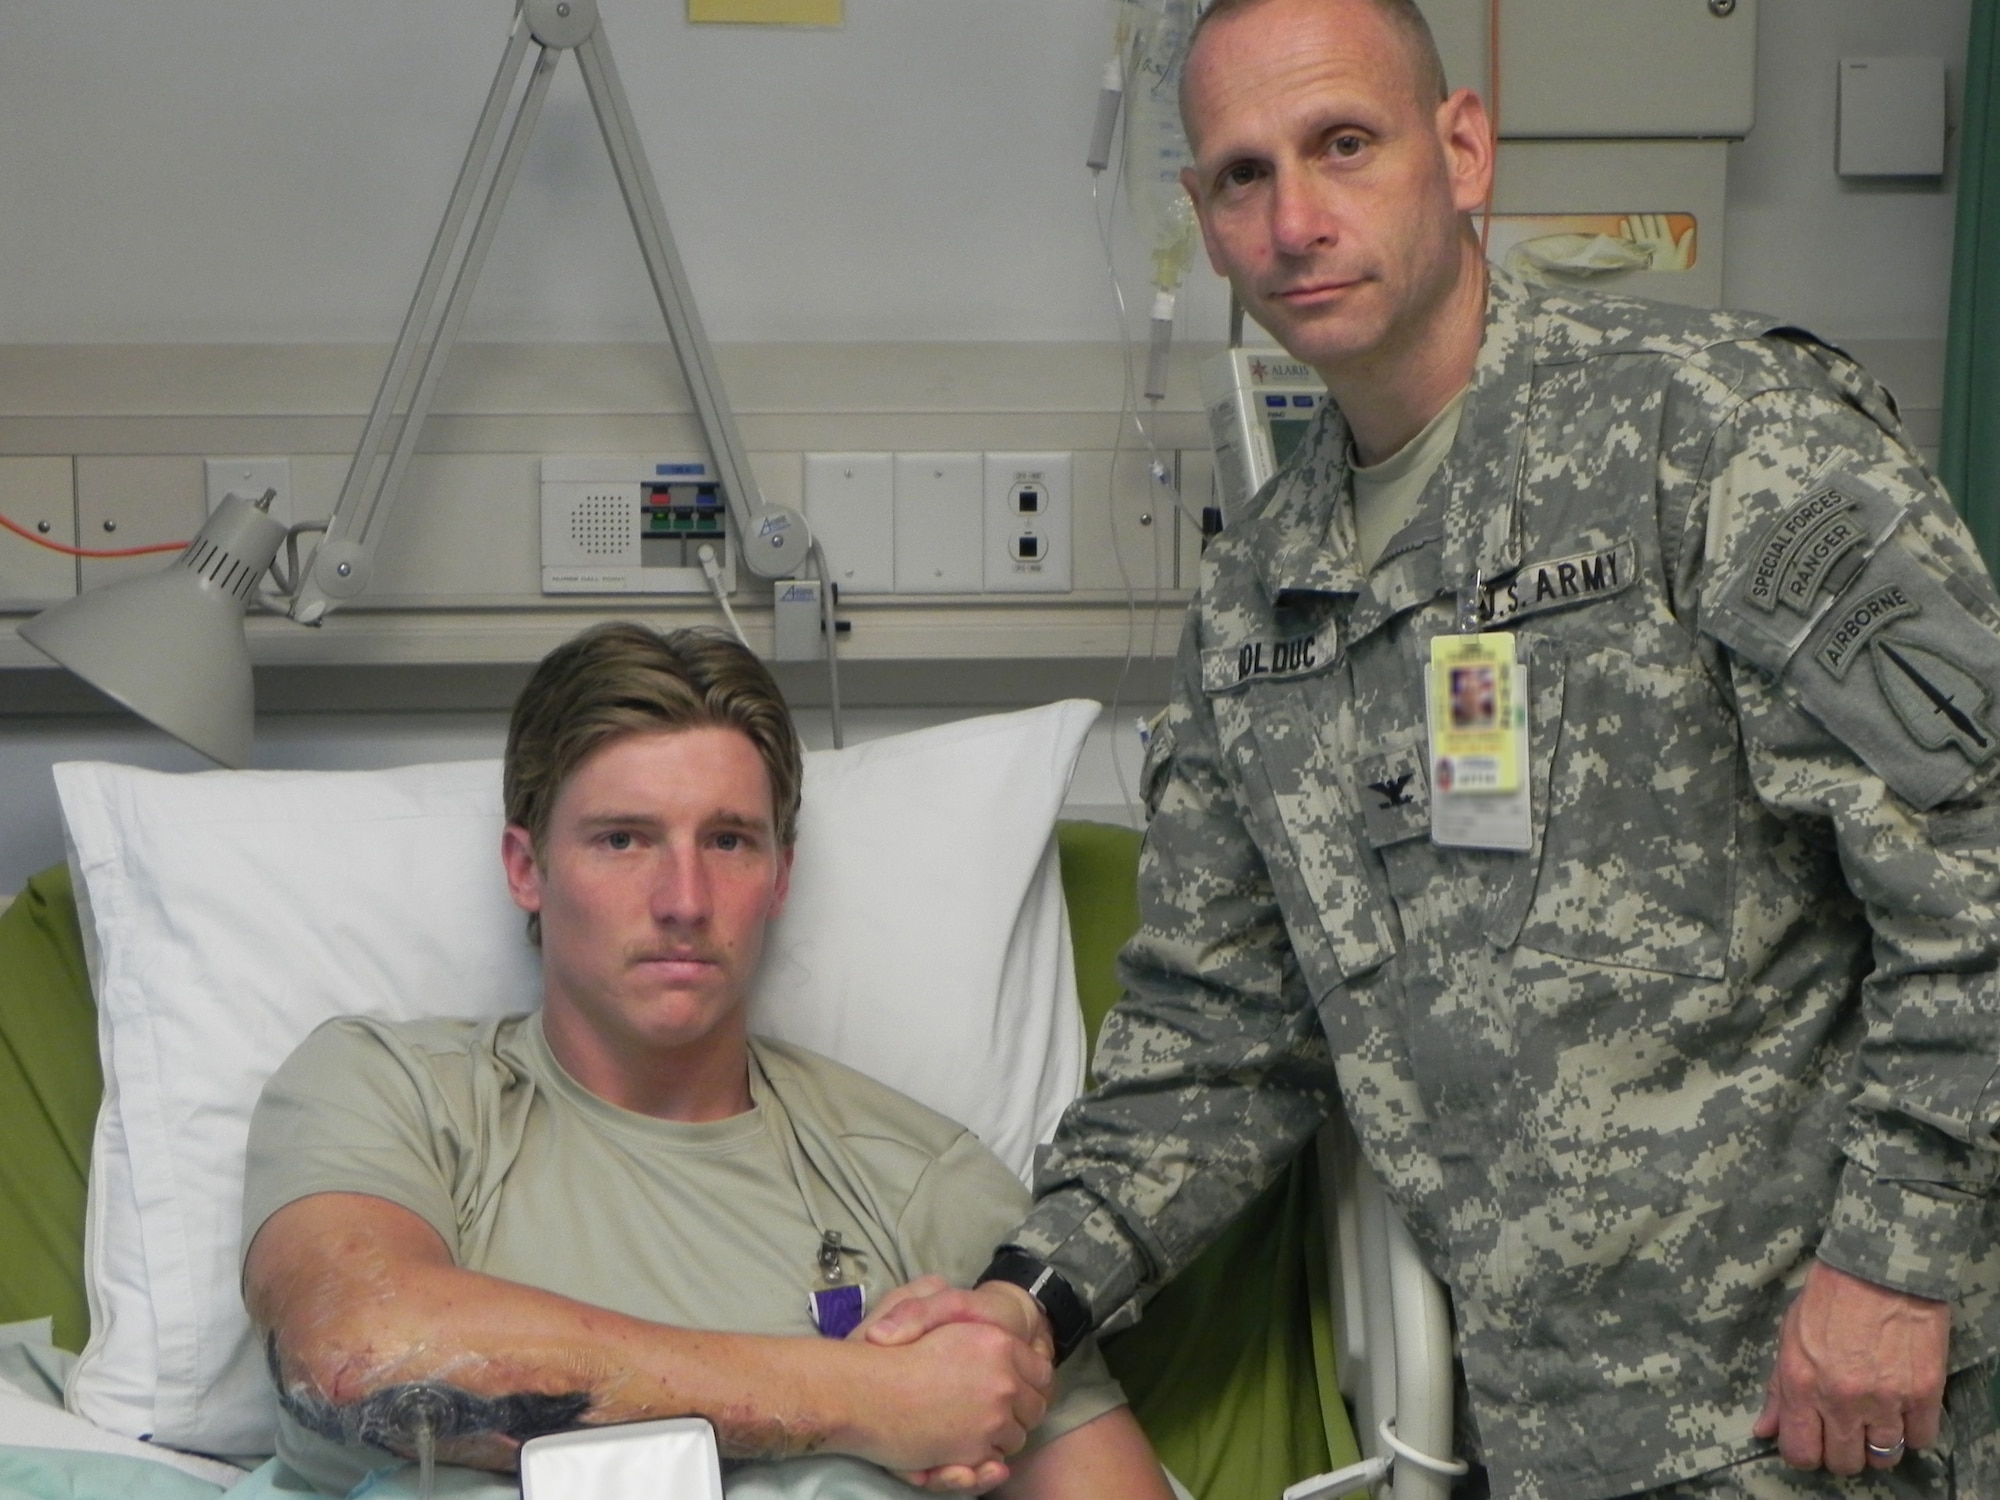 BAGRAM AIRFIELD, Afghanistan -- Staff Sgt. Travis Dalton, a combat controller with the 320th Special Tactics Squadron, shakes hands with Col. David Buldoc, Combined Joint Special Operations Task Force-Afghanistan commander, after receiving the Purple Heart at Craig Joint Theater Hospital here May 10.  Sergeant Dalton was wounded in his right arm, hamstrings and buttocks May 8 when an improvised explosive device detonated near him during a dismounted combat patrol in Helmand Province in Afghanistan. (Courtesy photo)                               